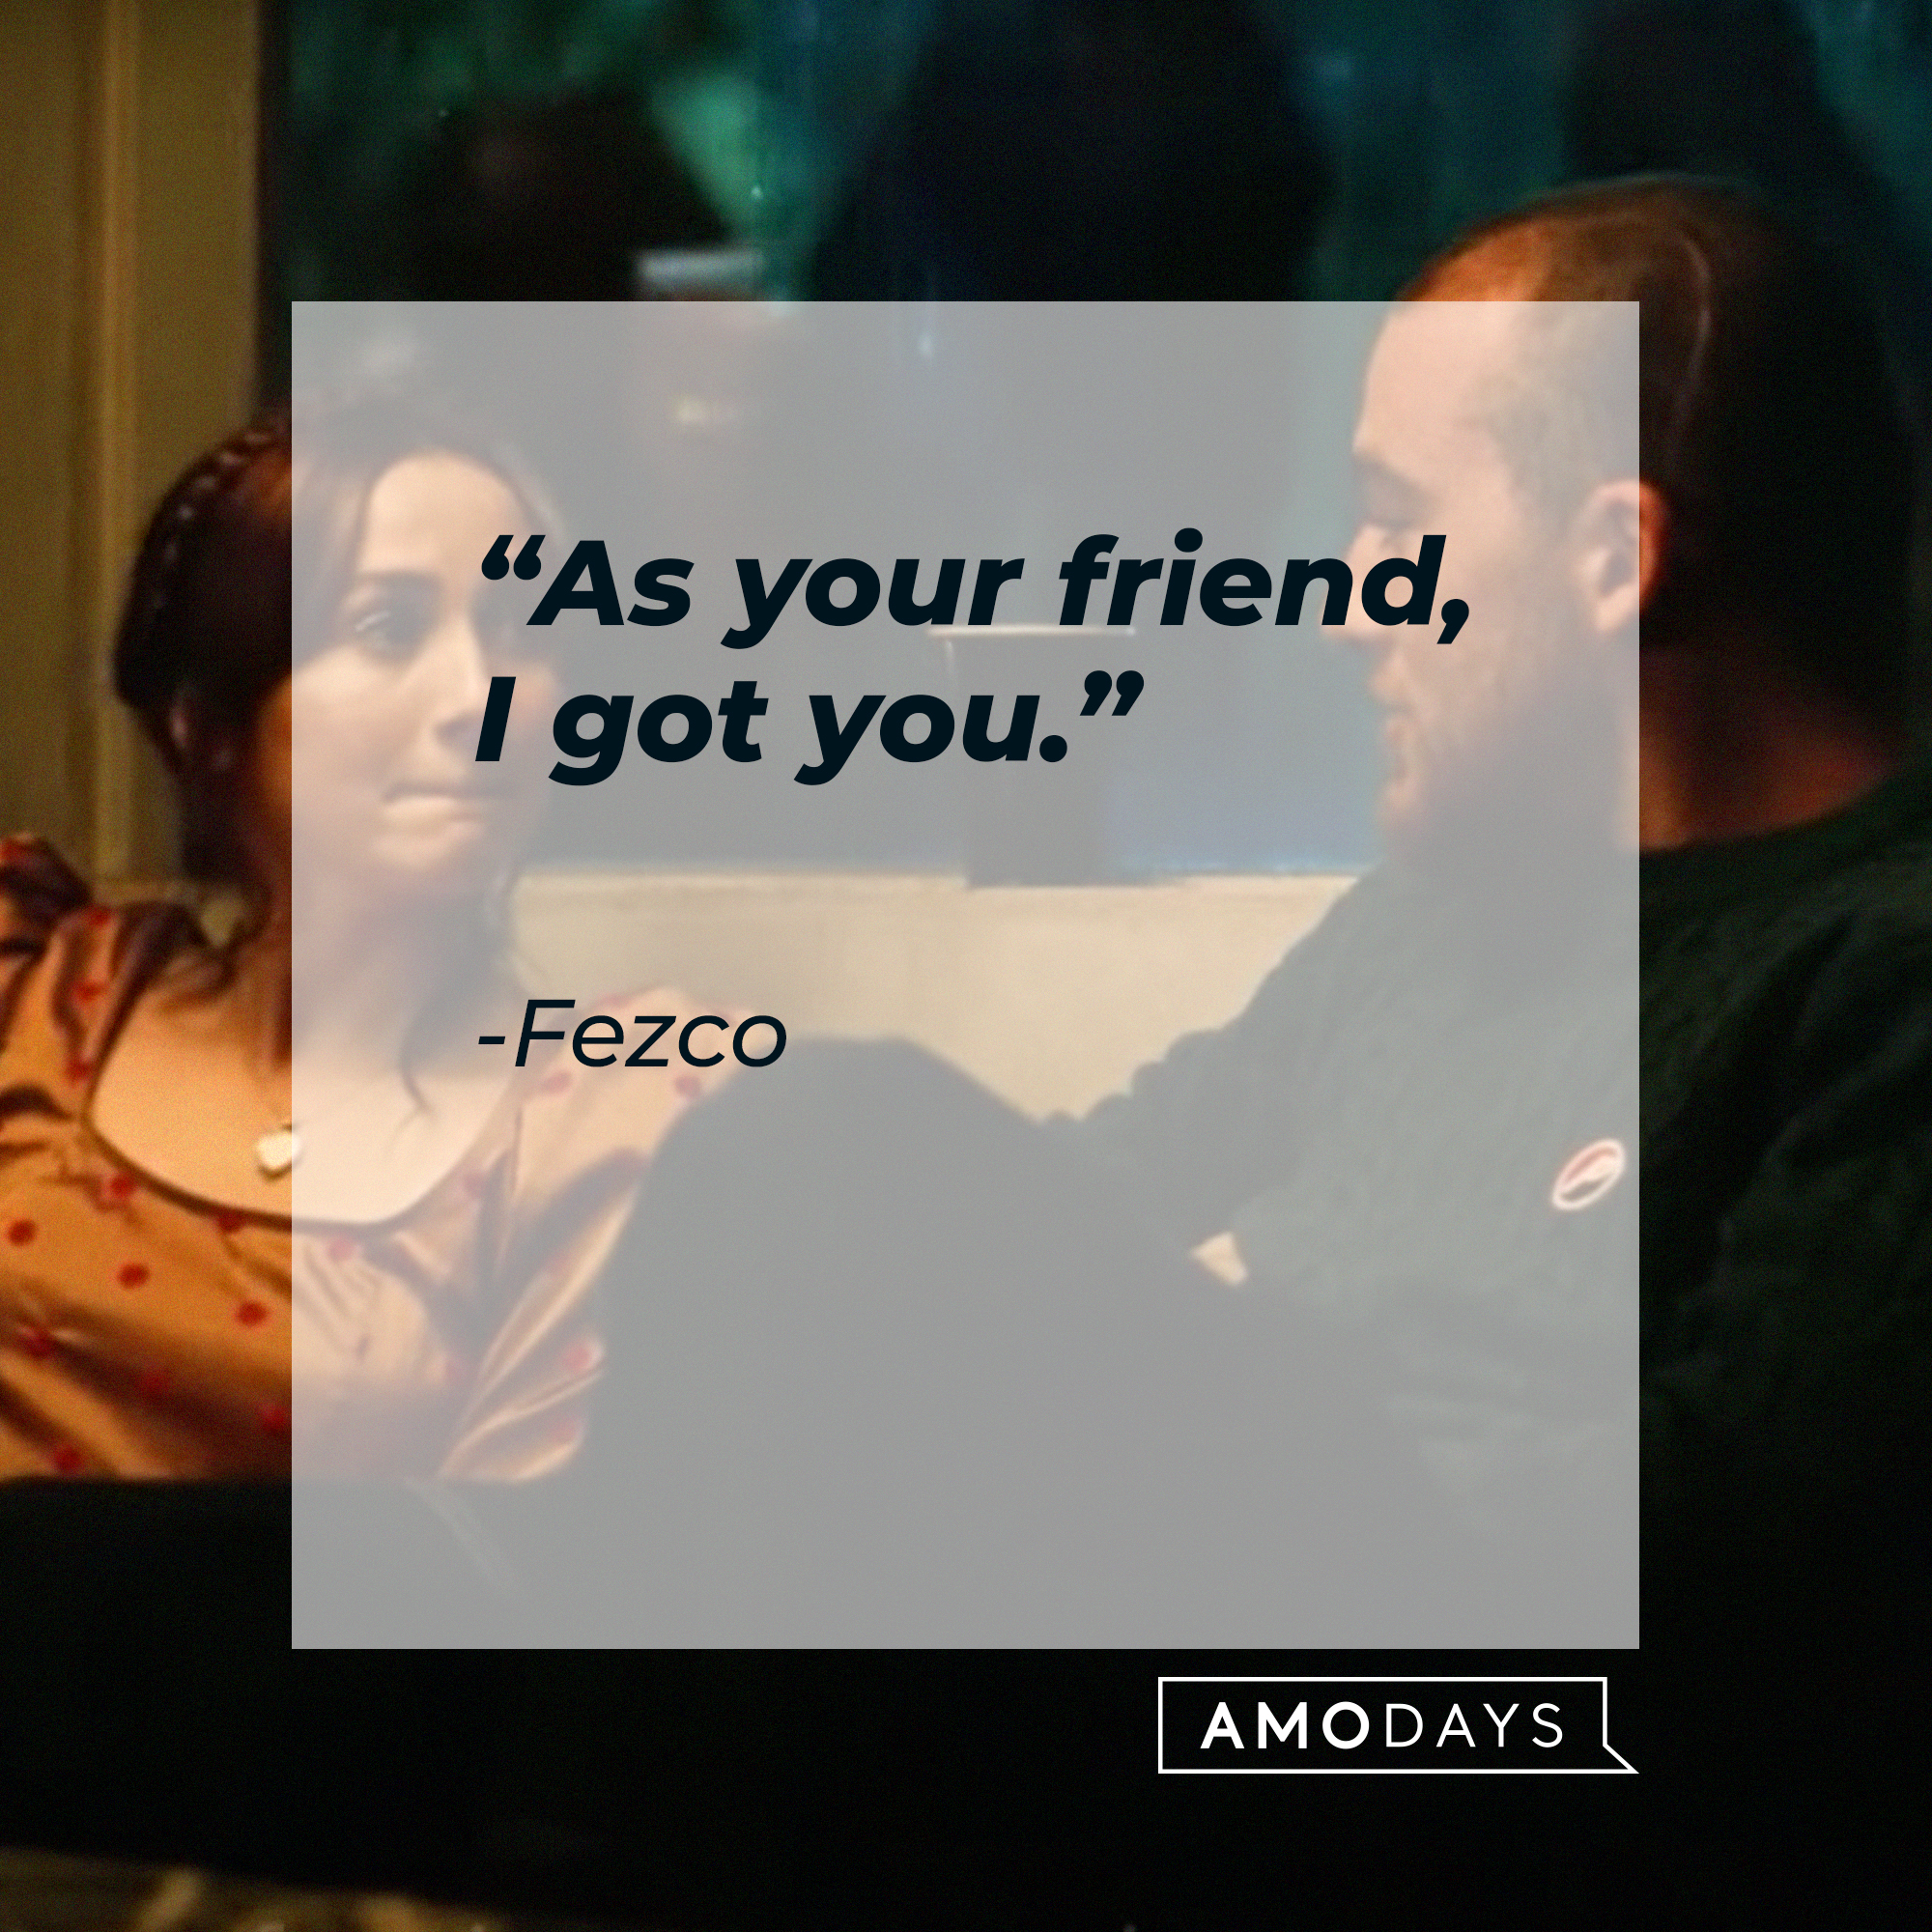 Fezco with Lexi and his quote: "As your friend, I got you." | Source: youtube.com/EuphoriaHBO